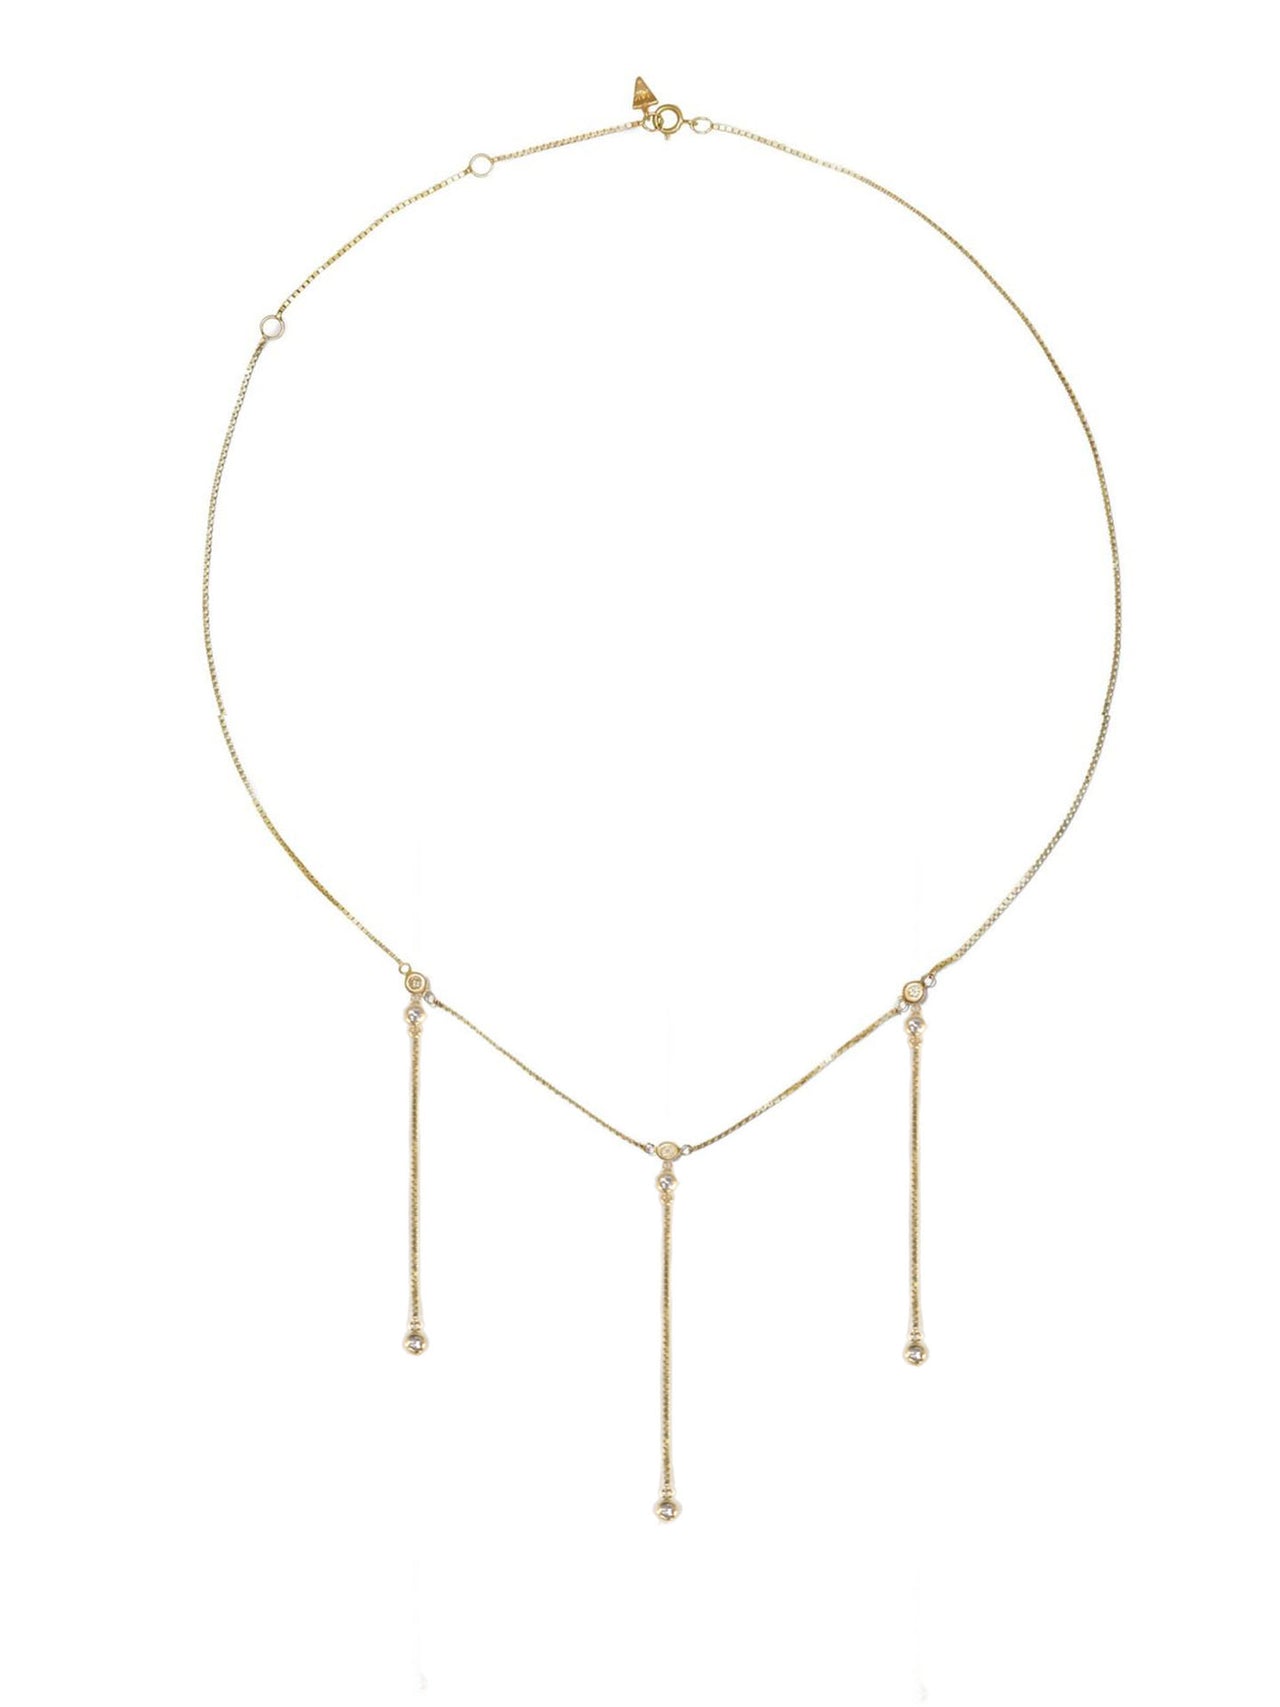 Diamond Gypsy Necklace - Archival Collection